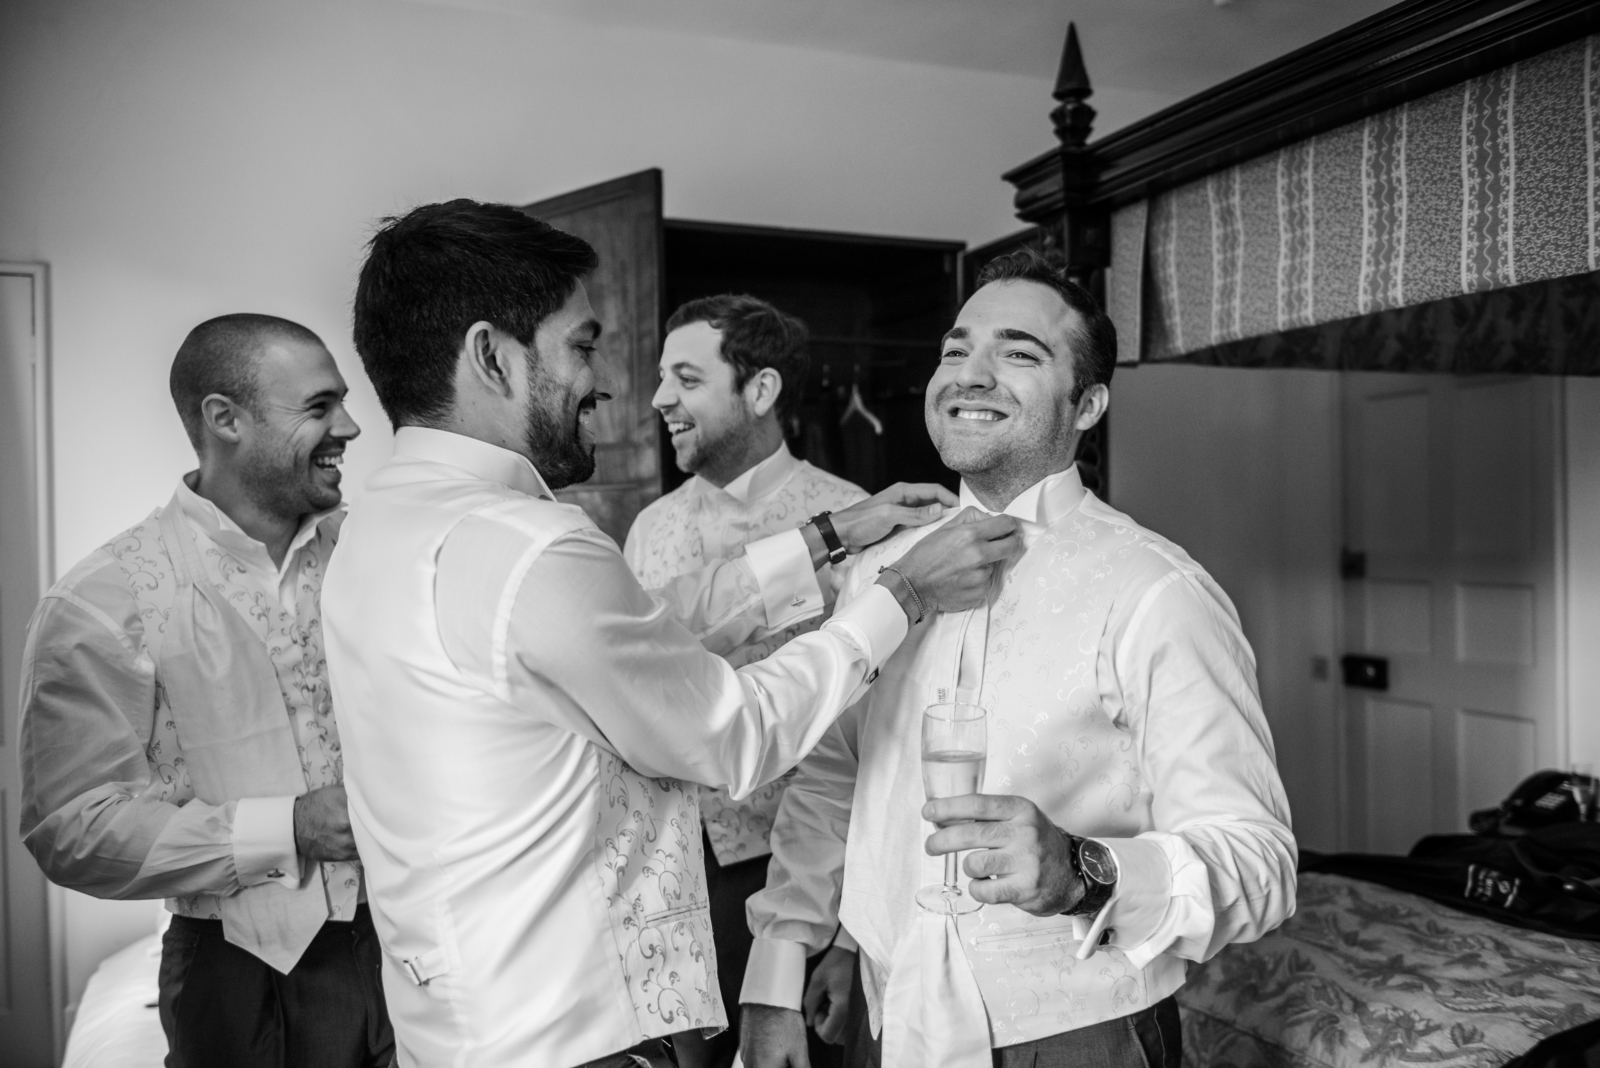 A group of men laughing, preparing for a wedding